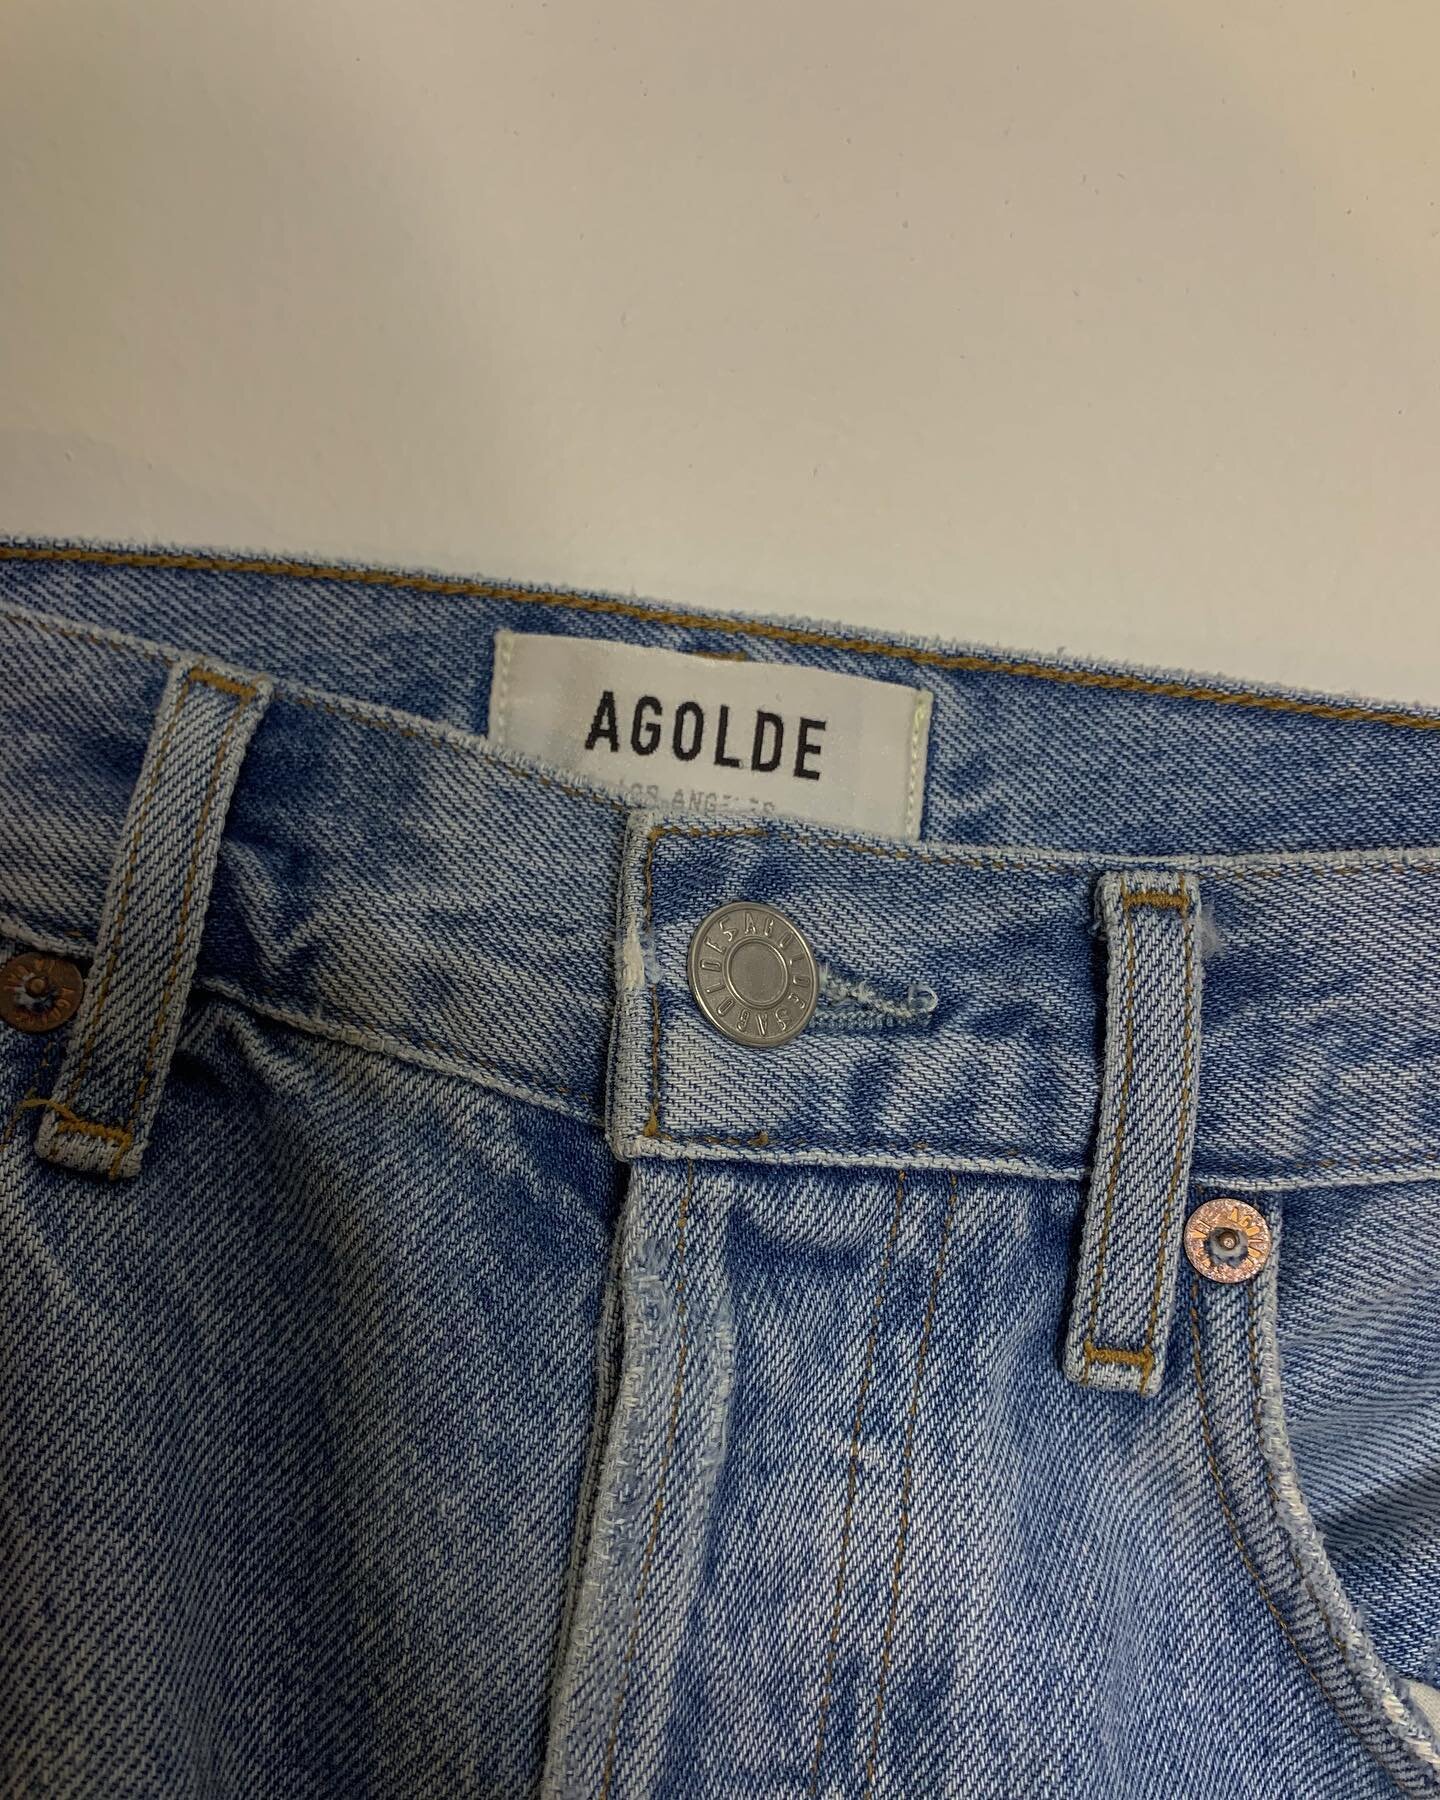 Best. Jeans. Ever.